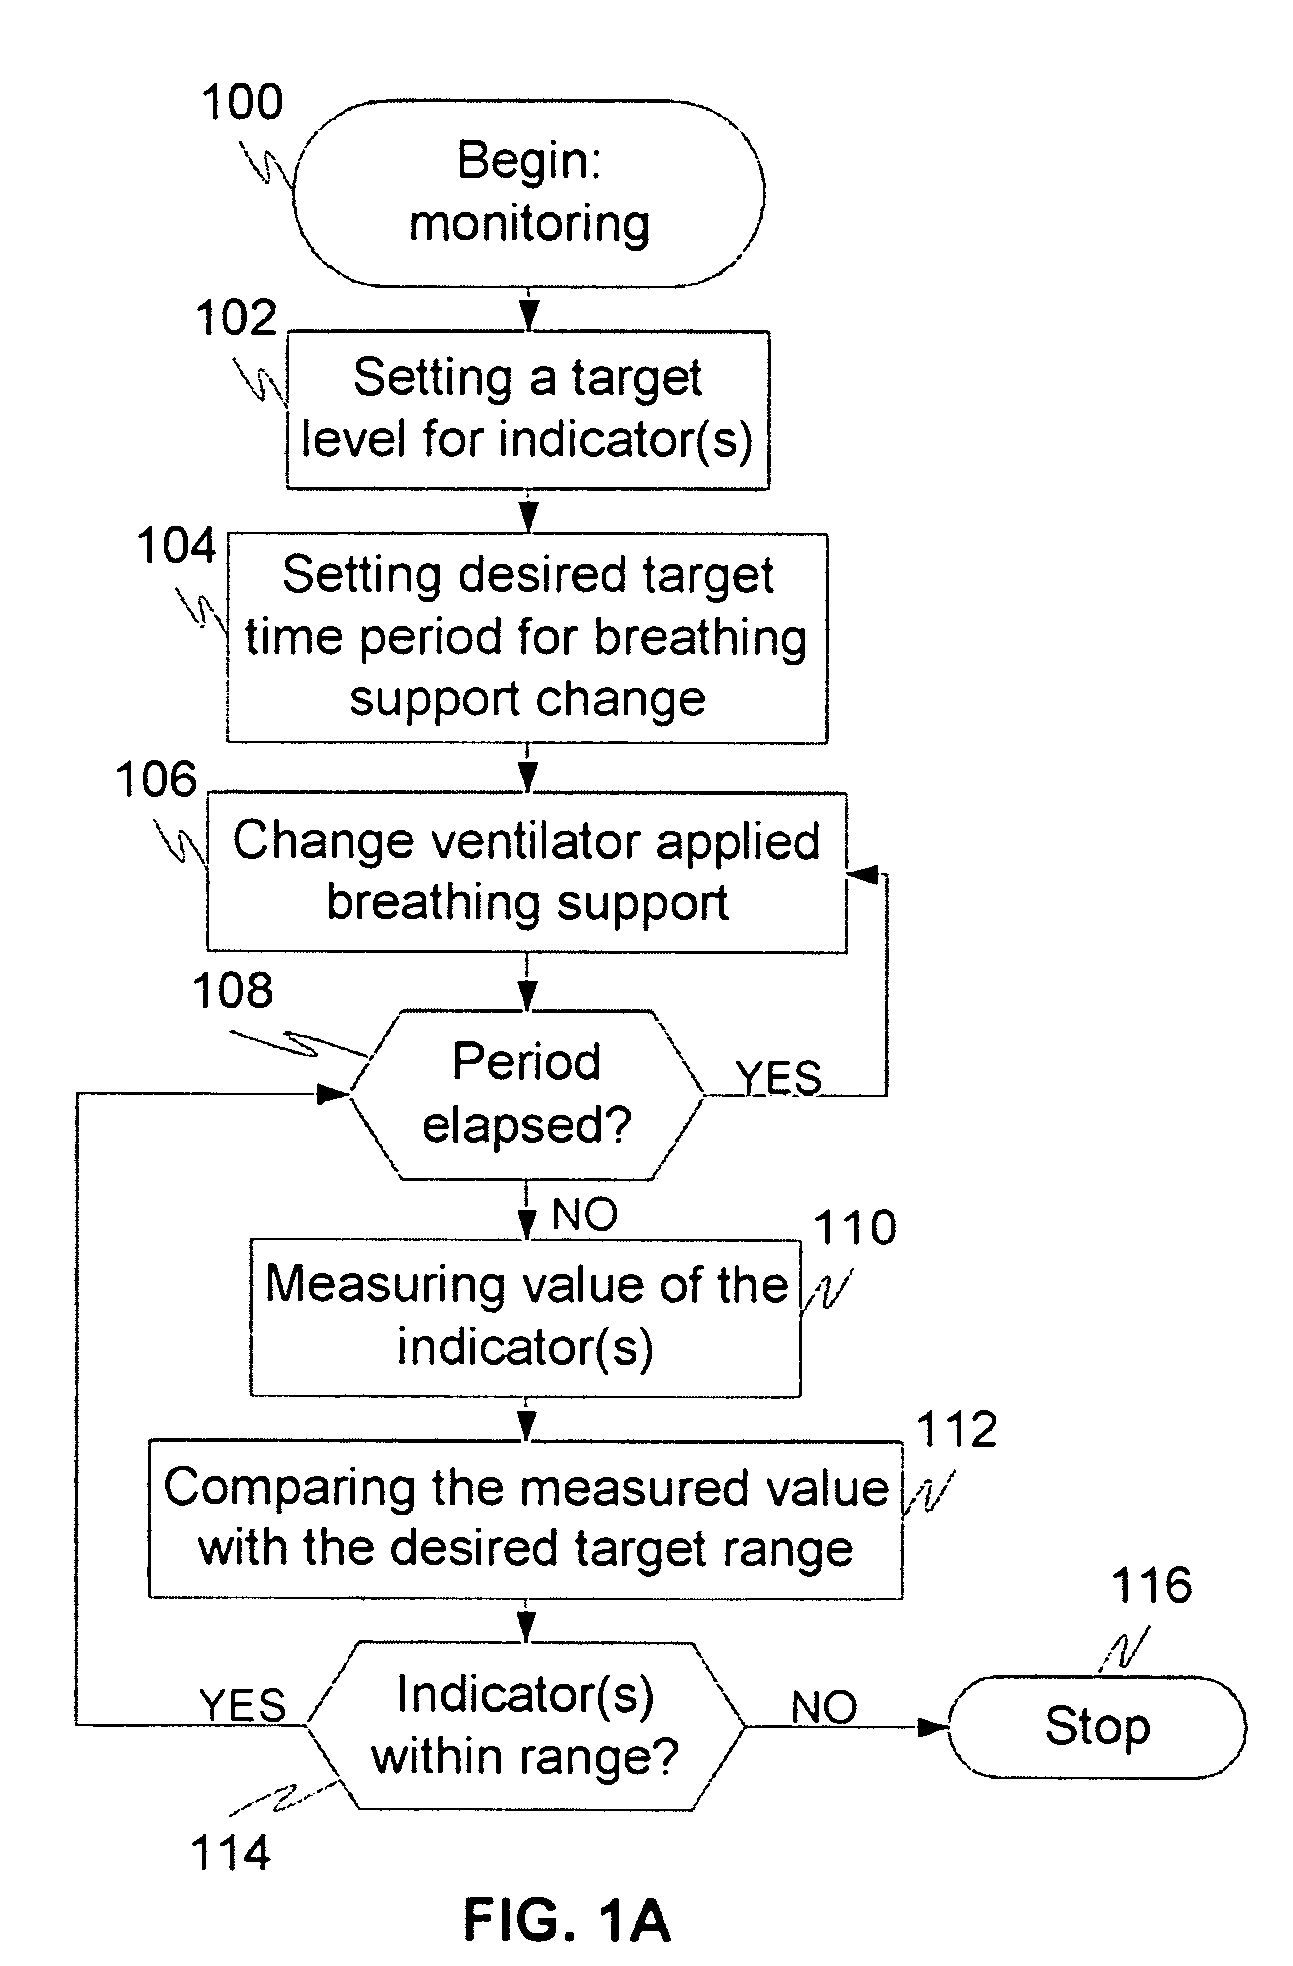 Method and system for monitoring patient's breathing action response to changes in a ventilator applied breathing support